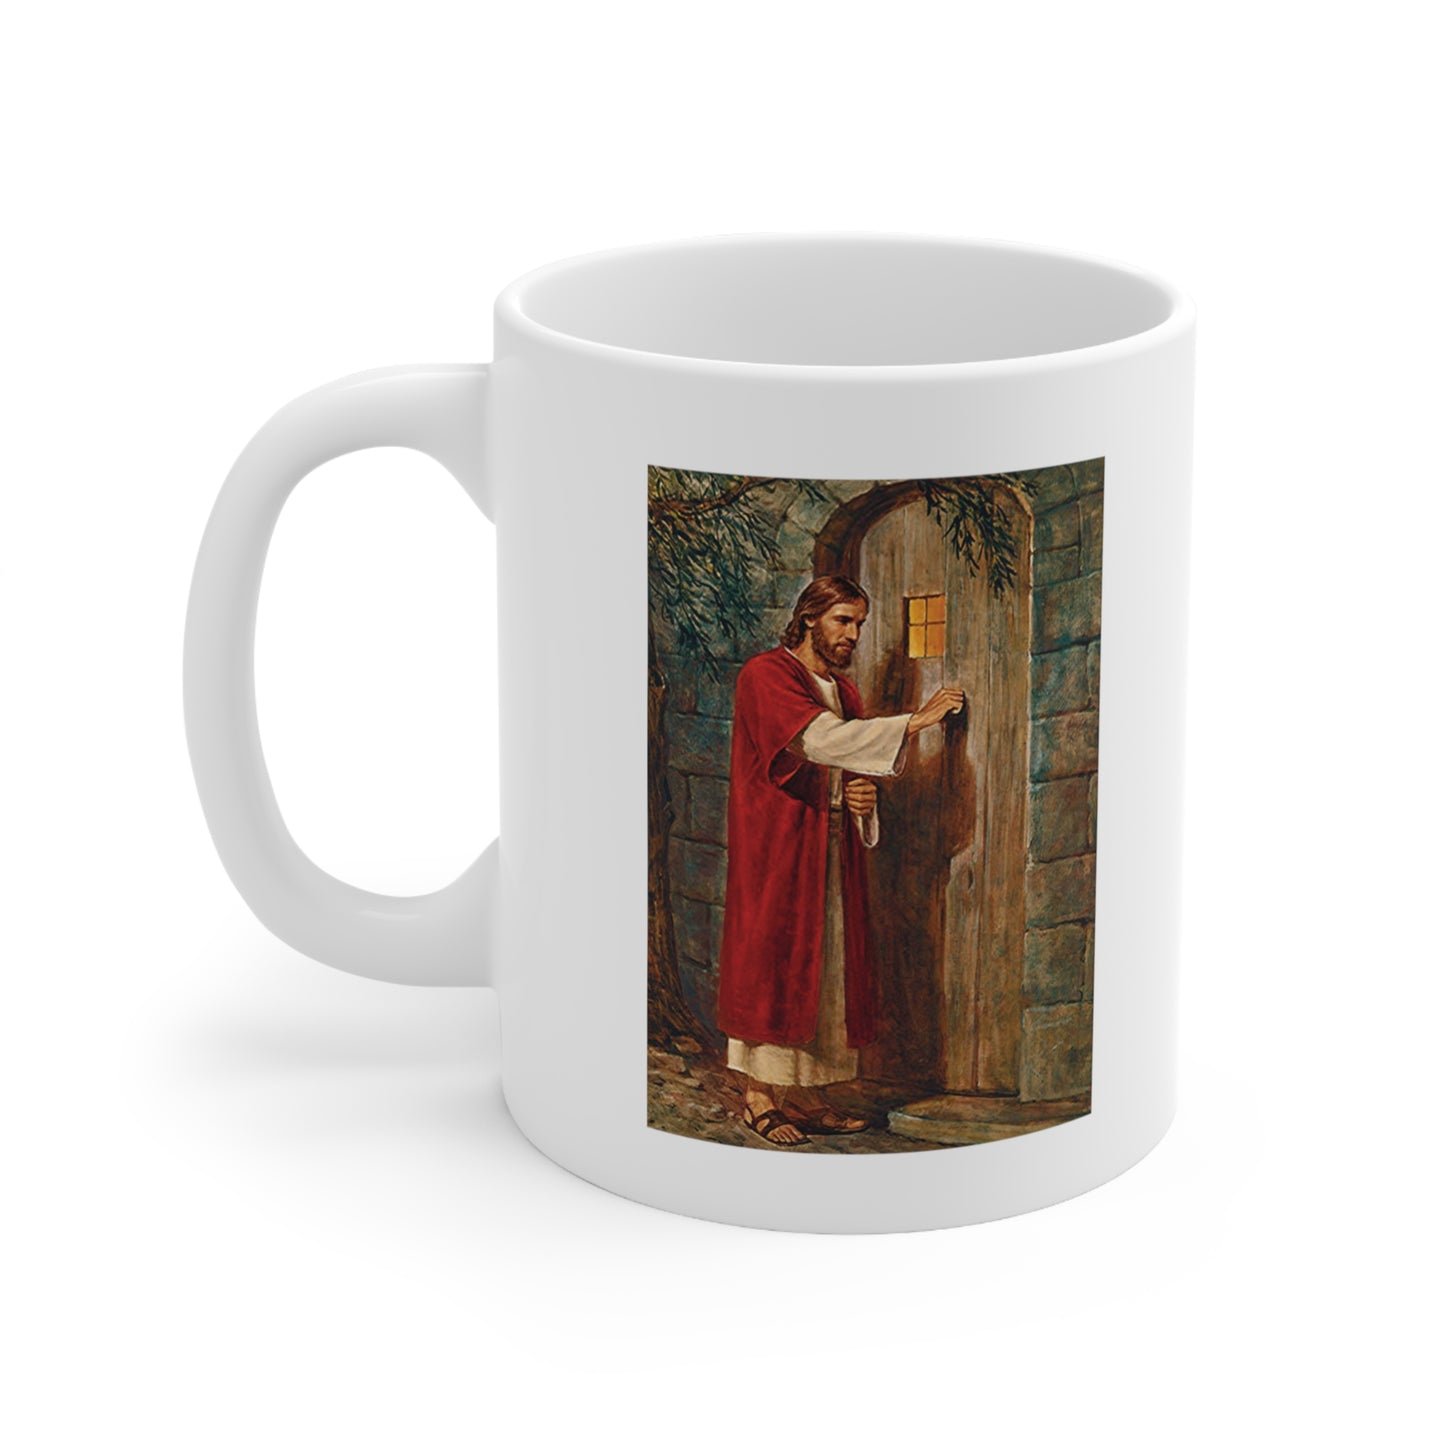 A white ceramic coffee mug with a painting of Jesus Christ knocking at the door